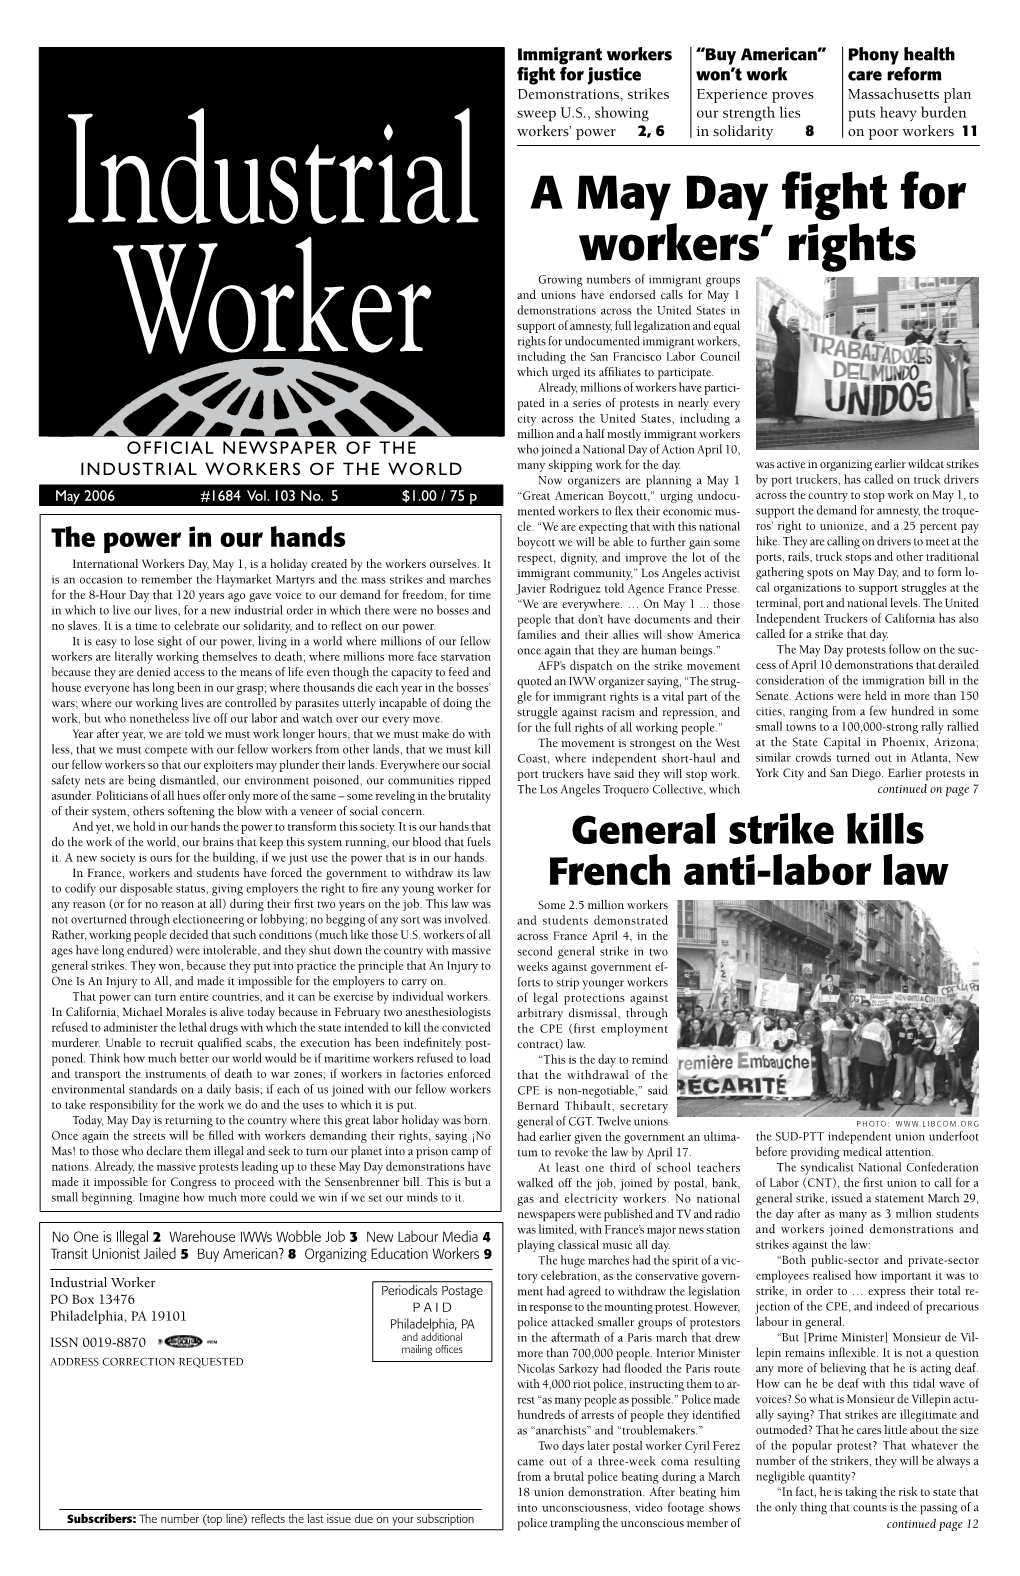 A May Day Fight for Workers' Rights